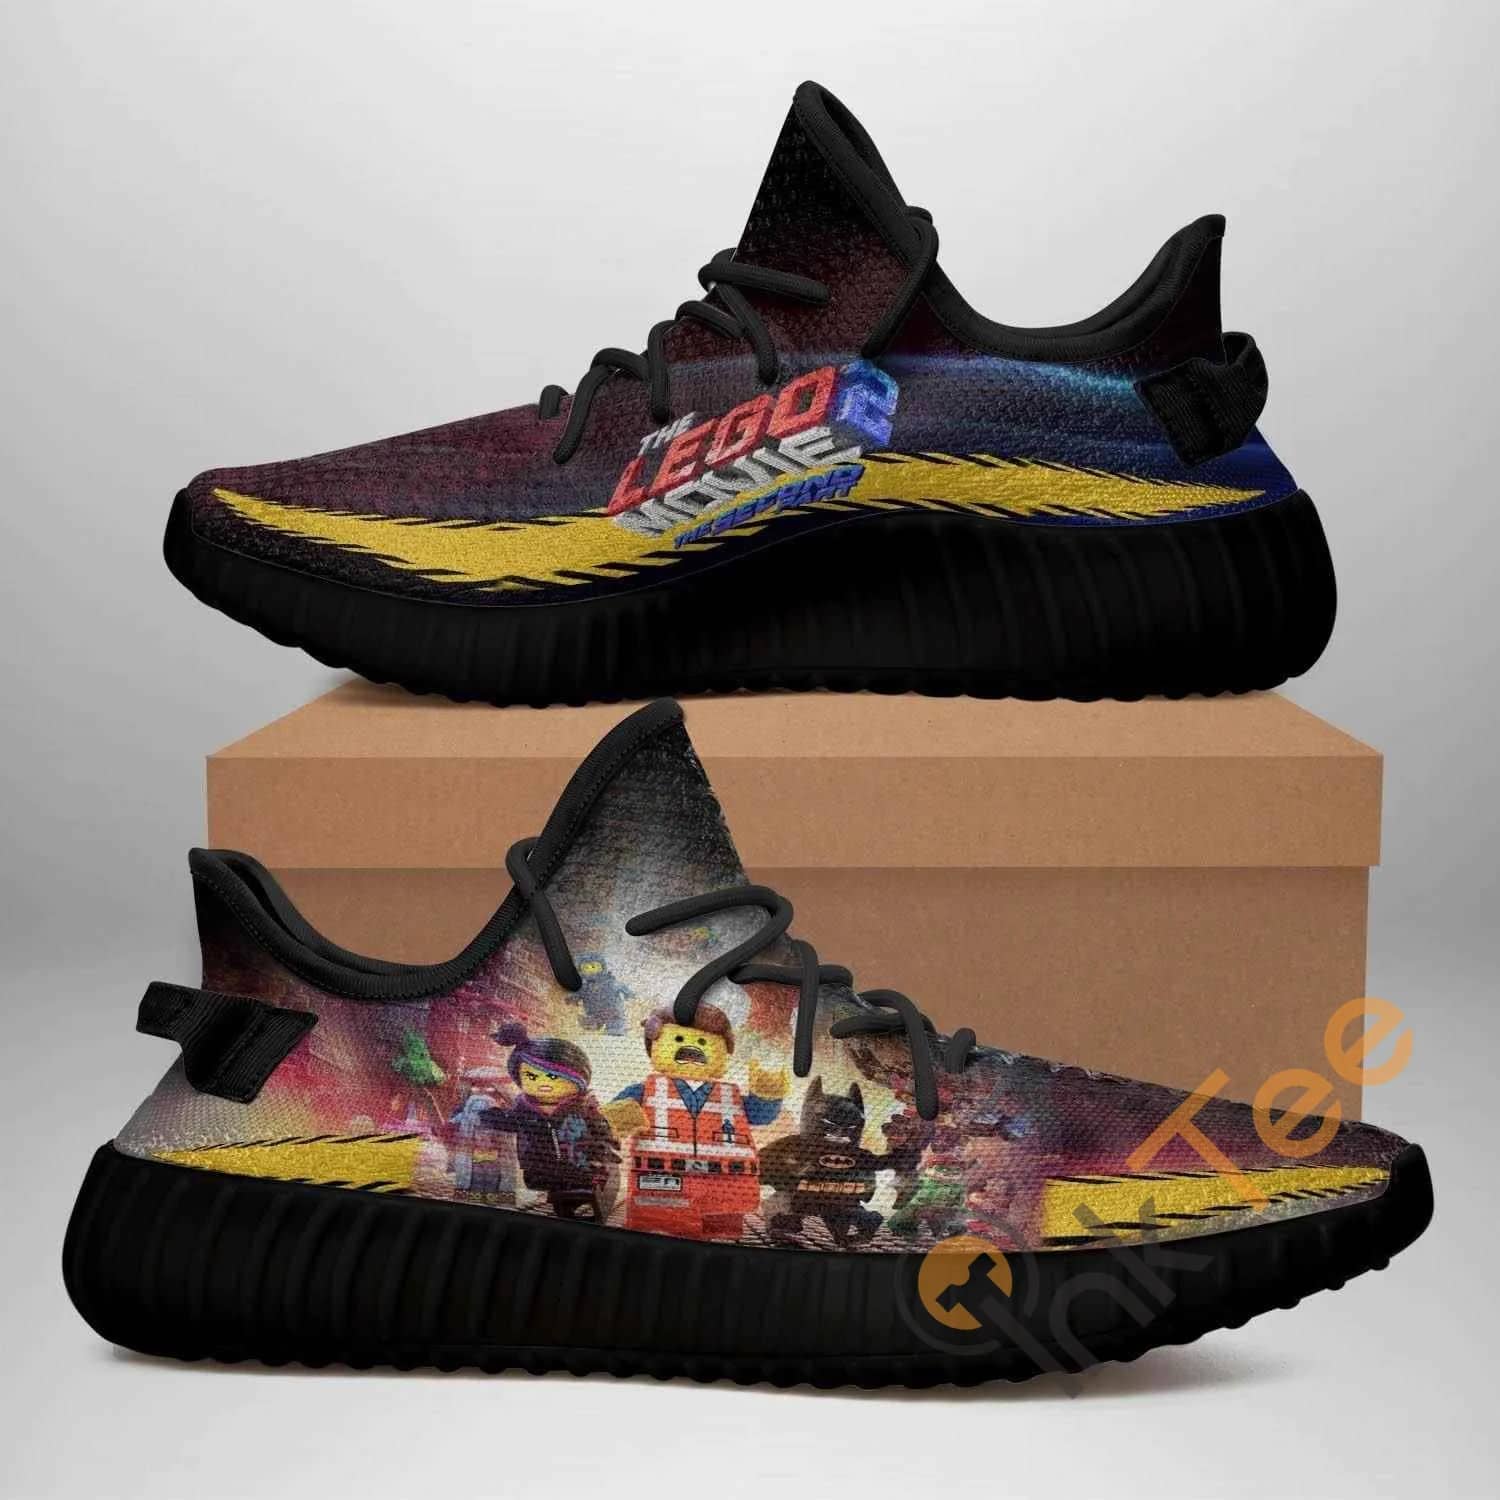 The Lego 2 Black Edition Amazon Best Selling Yeezy Boost